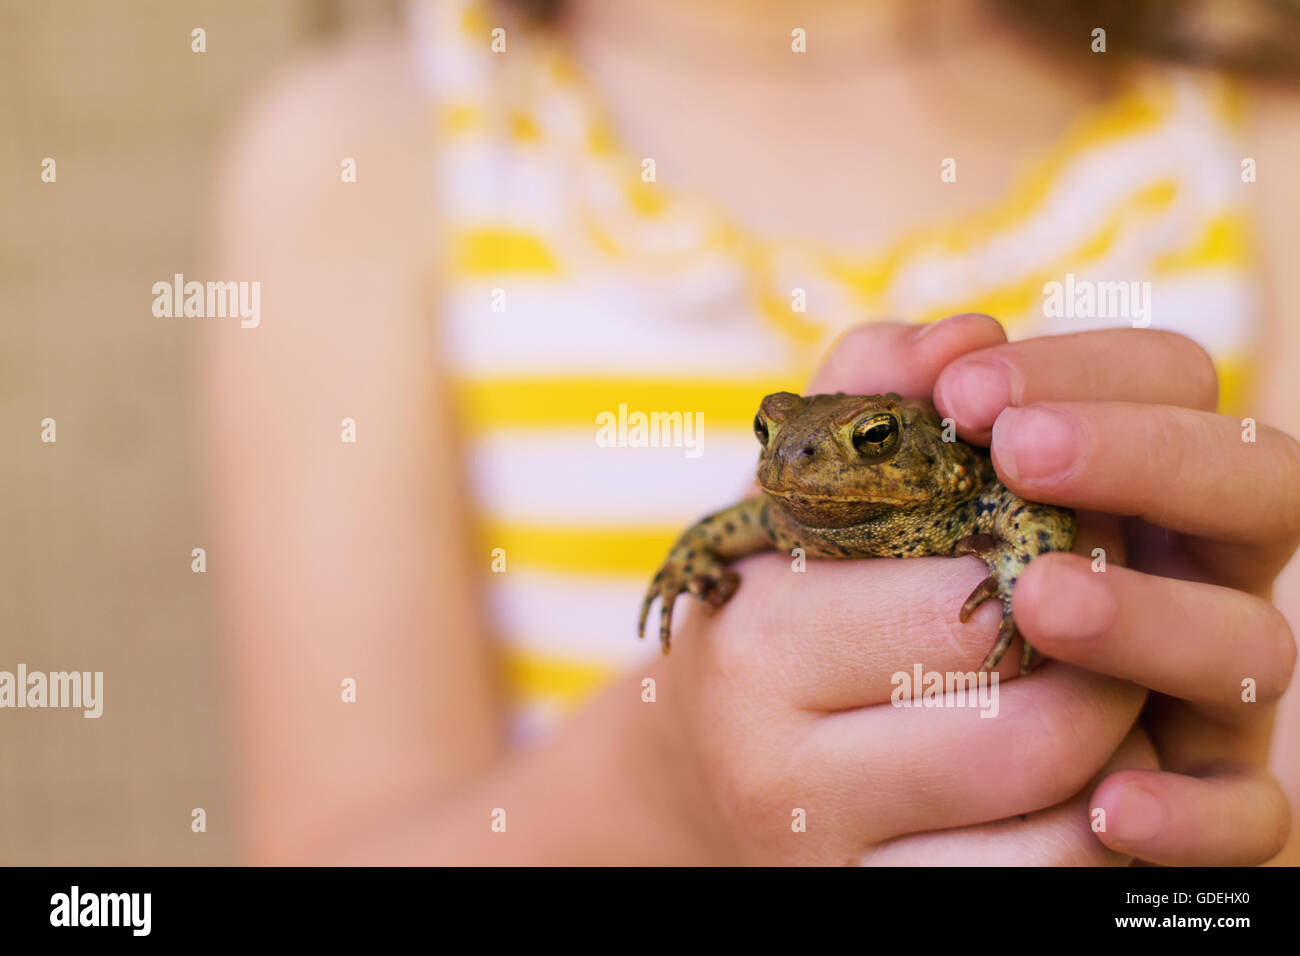 Girl holding une grenouille Banque D'Images